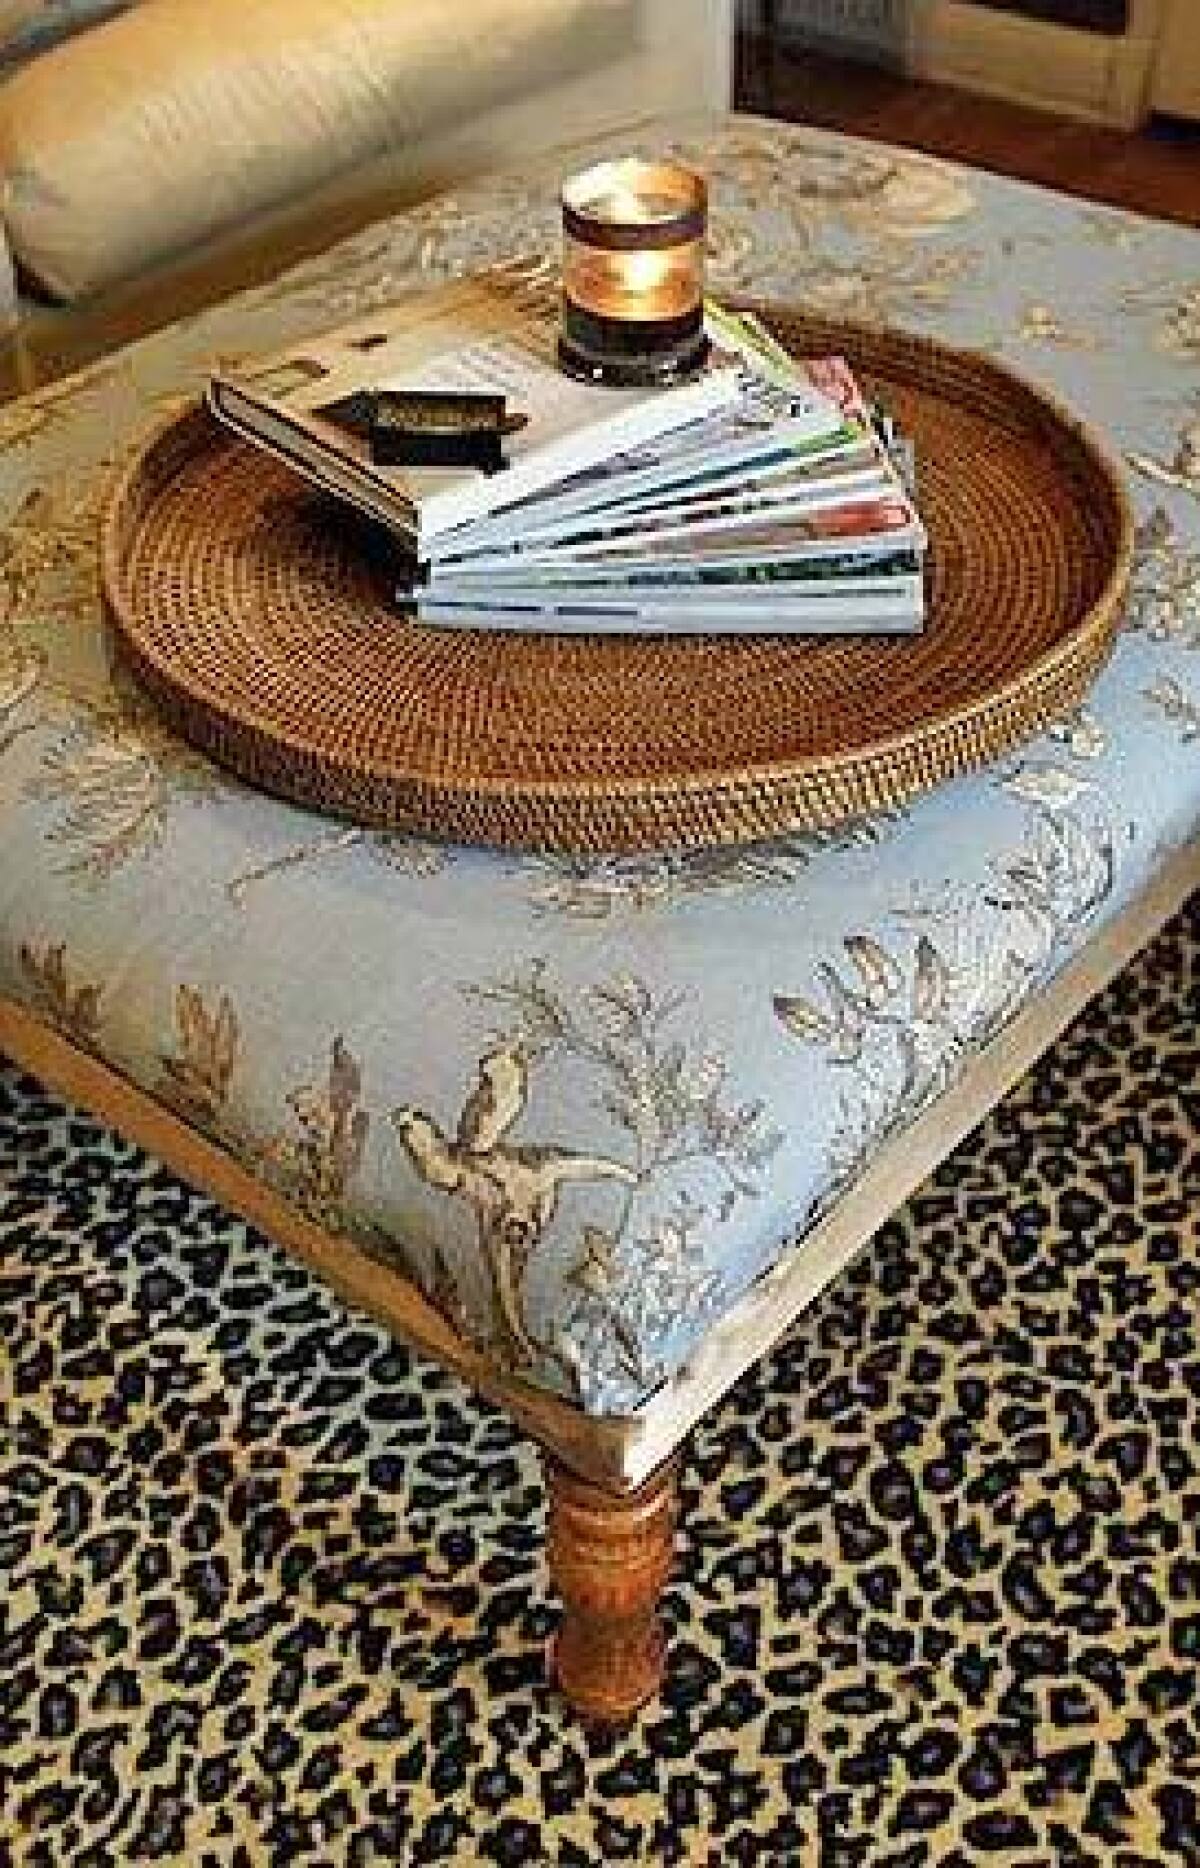 Ottomans can hold magazine or appetizer trays as well as guests.